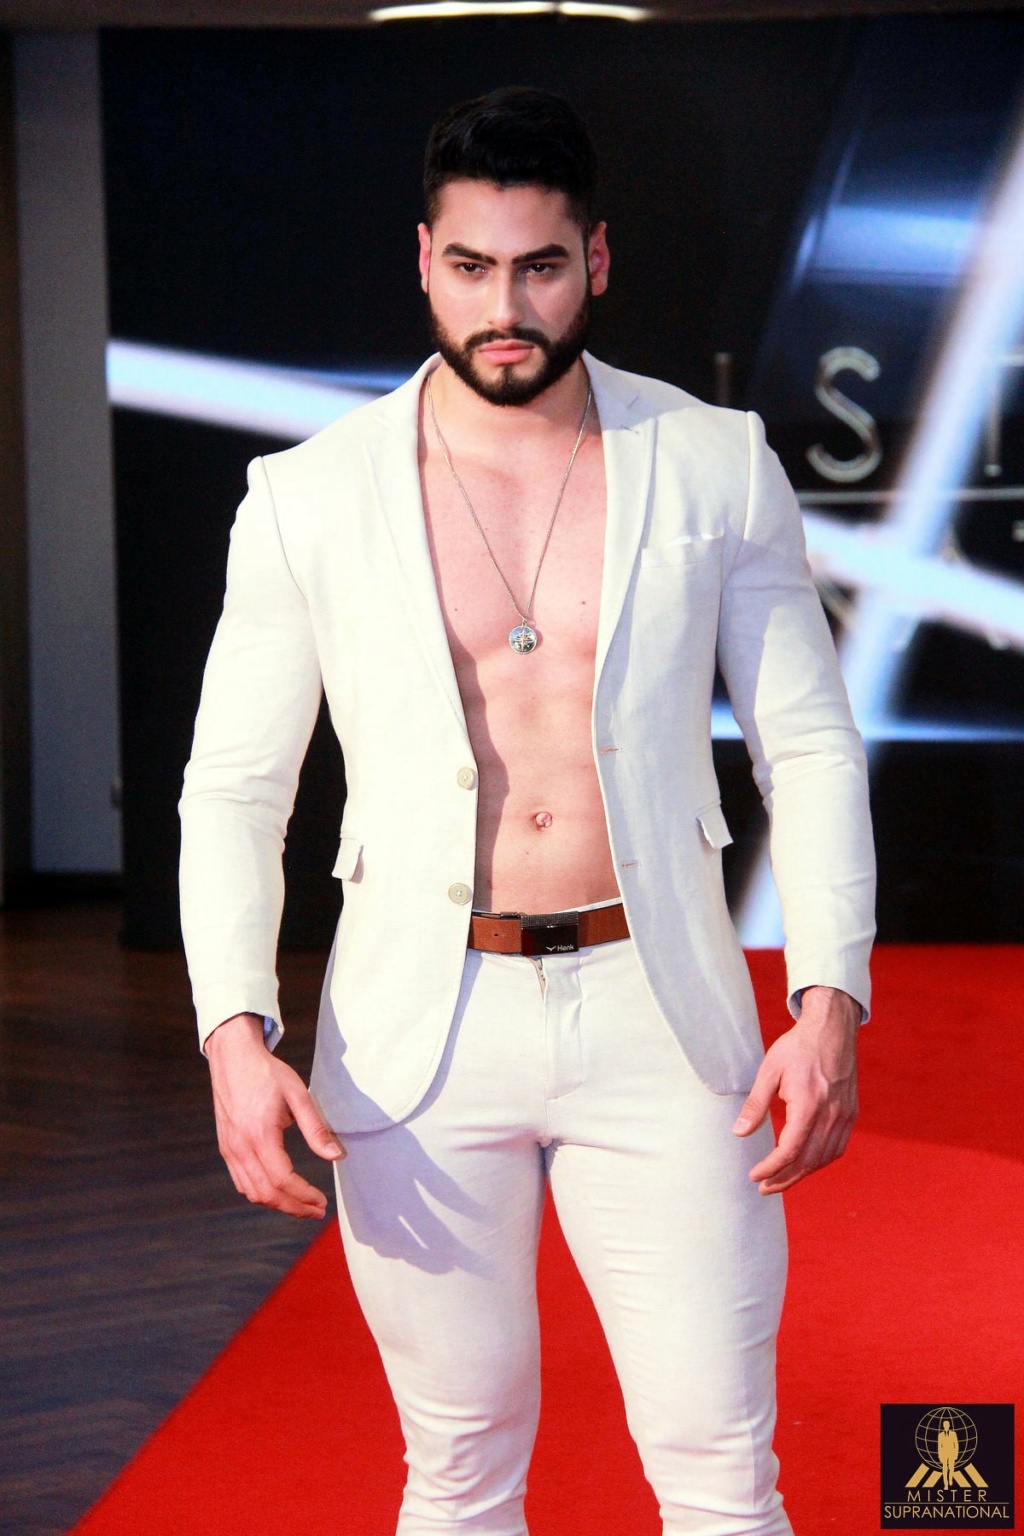 MISTER SUPRANATIONAL 2021 is PERU - Page 9 24011410